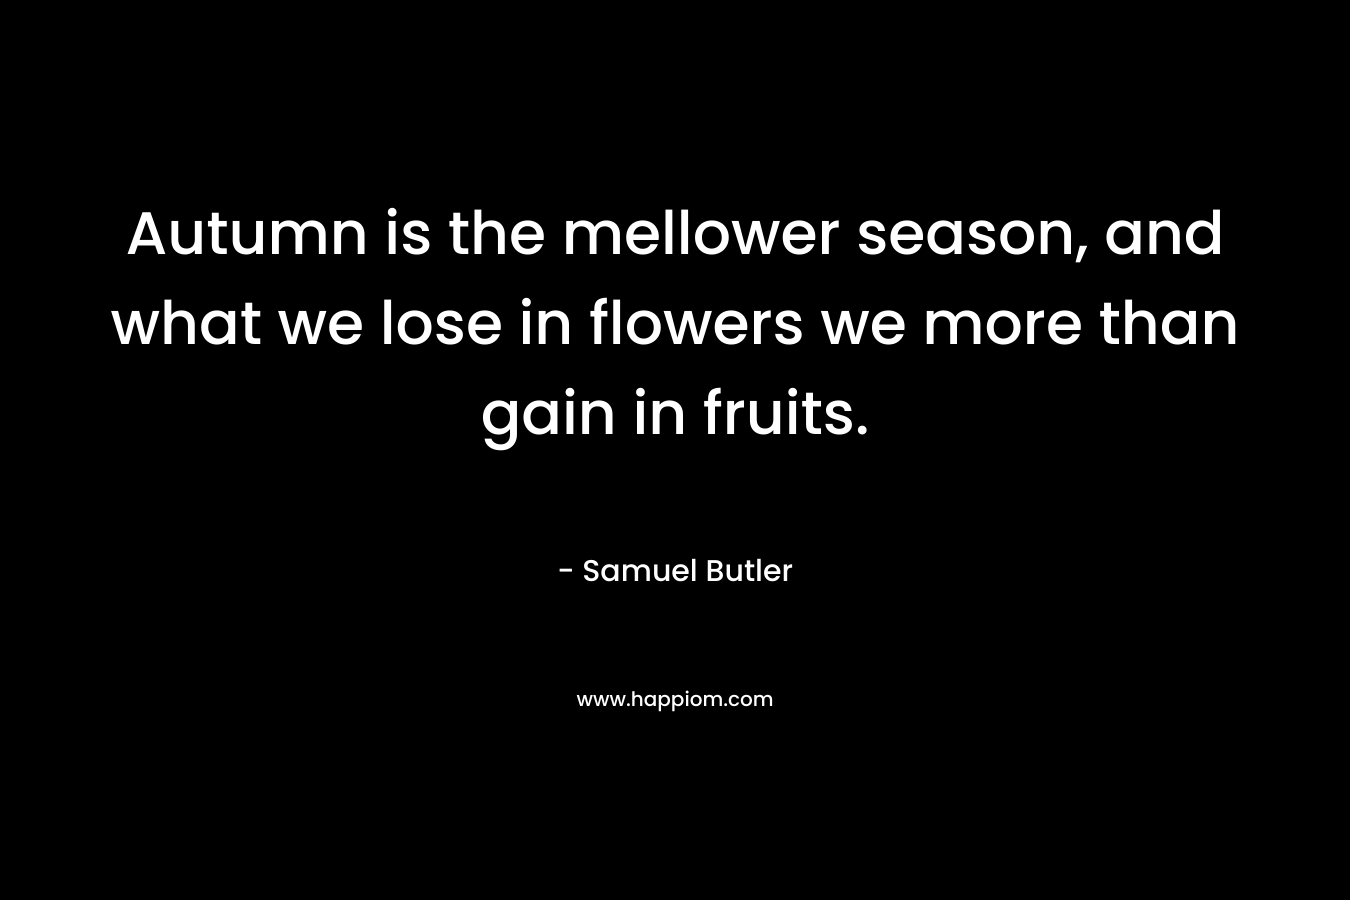 Autumn is the mellower season, and what we lose in flowers we more than gain in fruits.